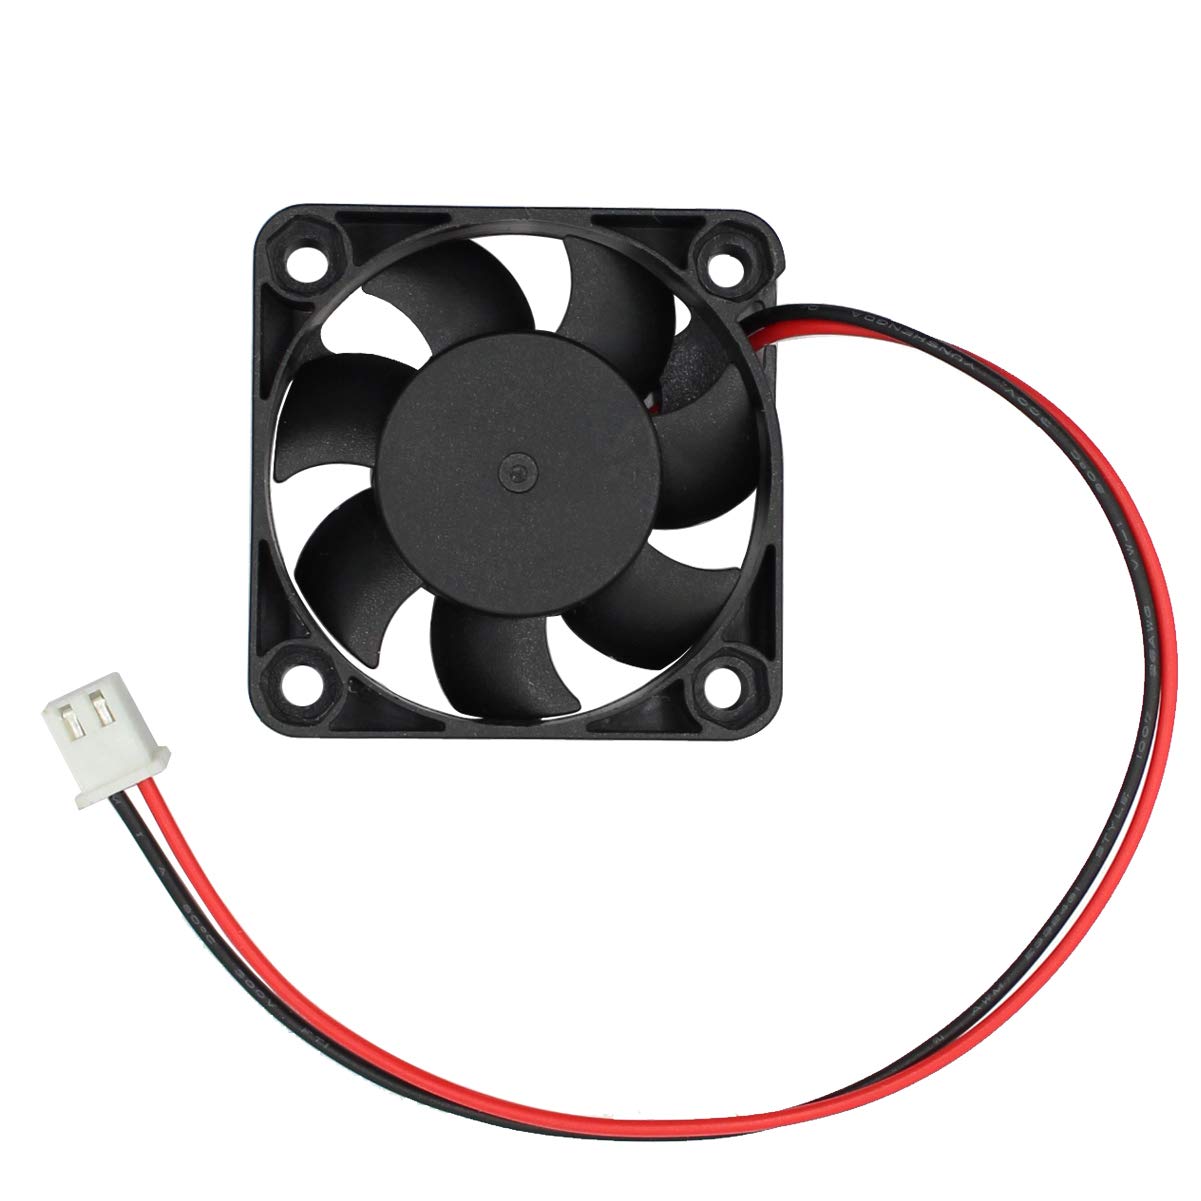 ANVISION 40mm x 10mm DC 5V Brushless Cooling Fan, Dual Ball Bearing, 2-Pin